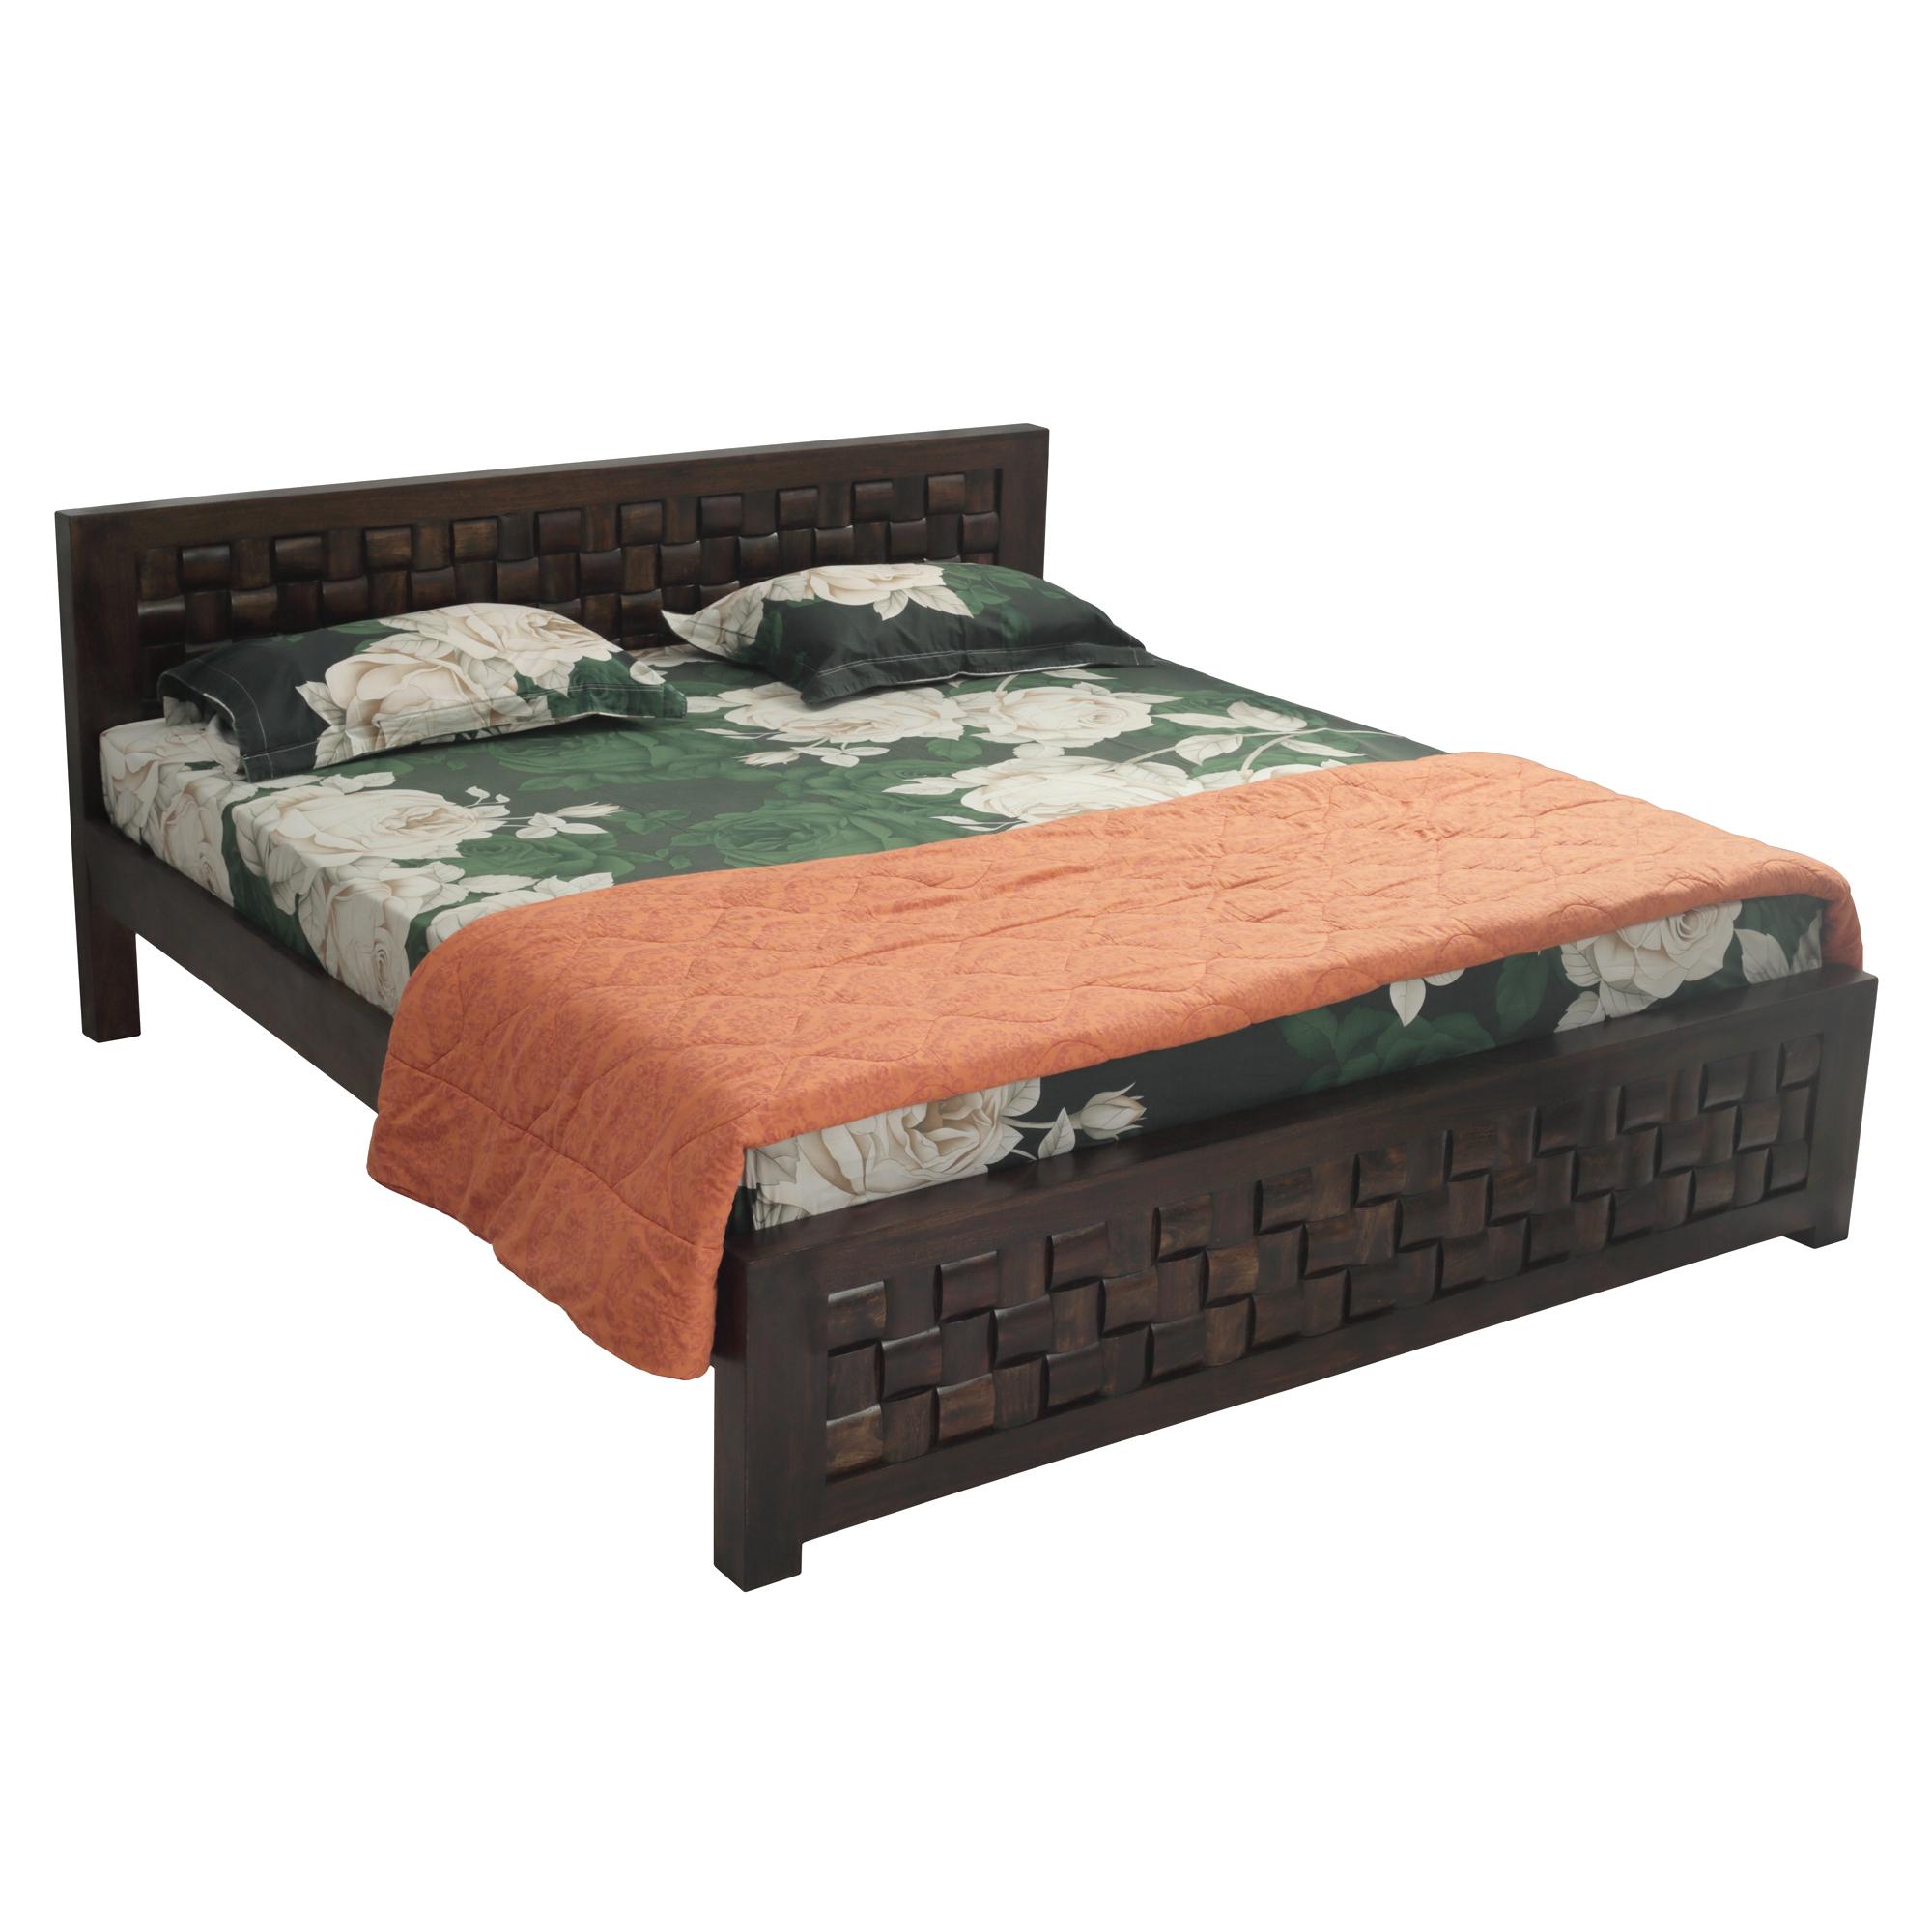 Acropolis Solid Wood Queen Size Bed in Provincial Teak Finish